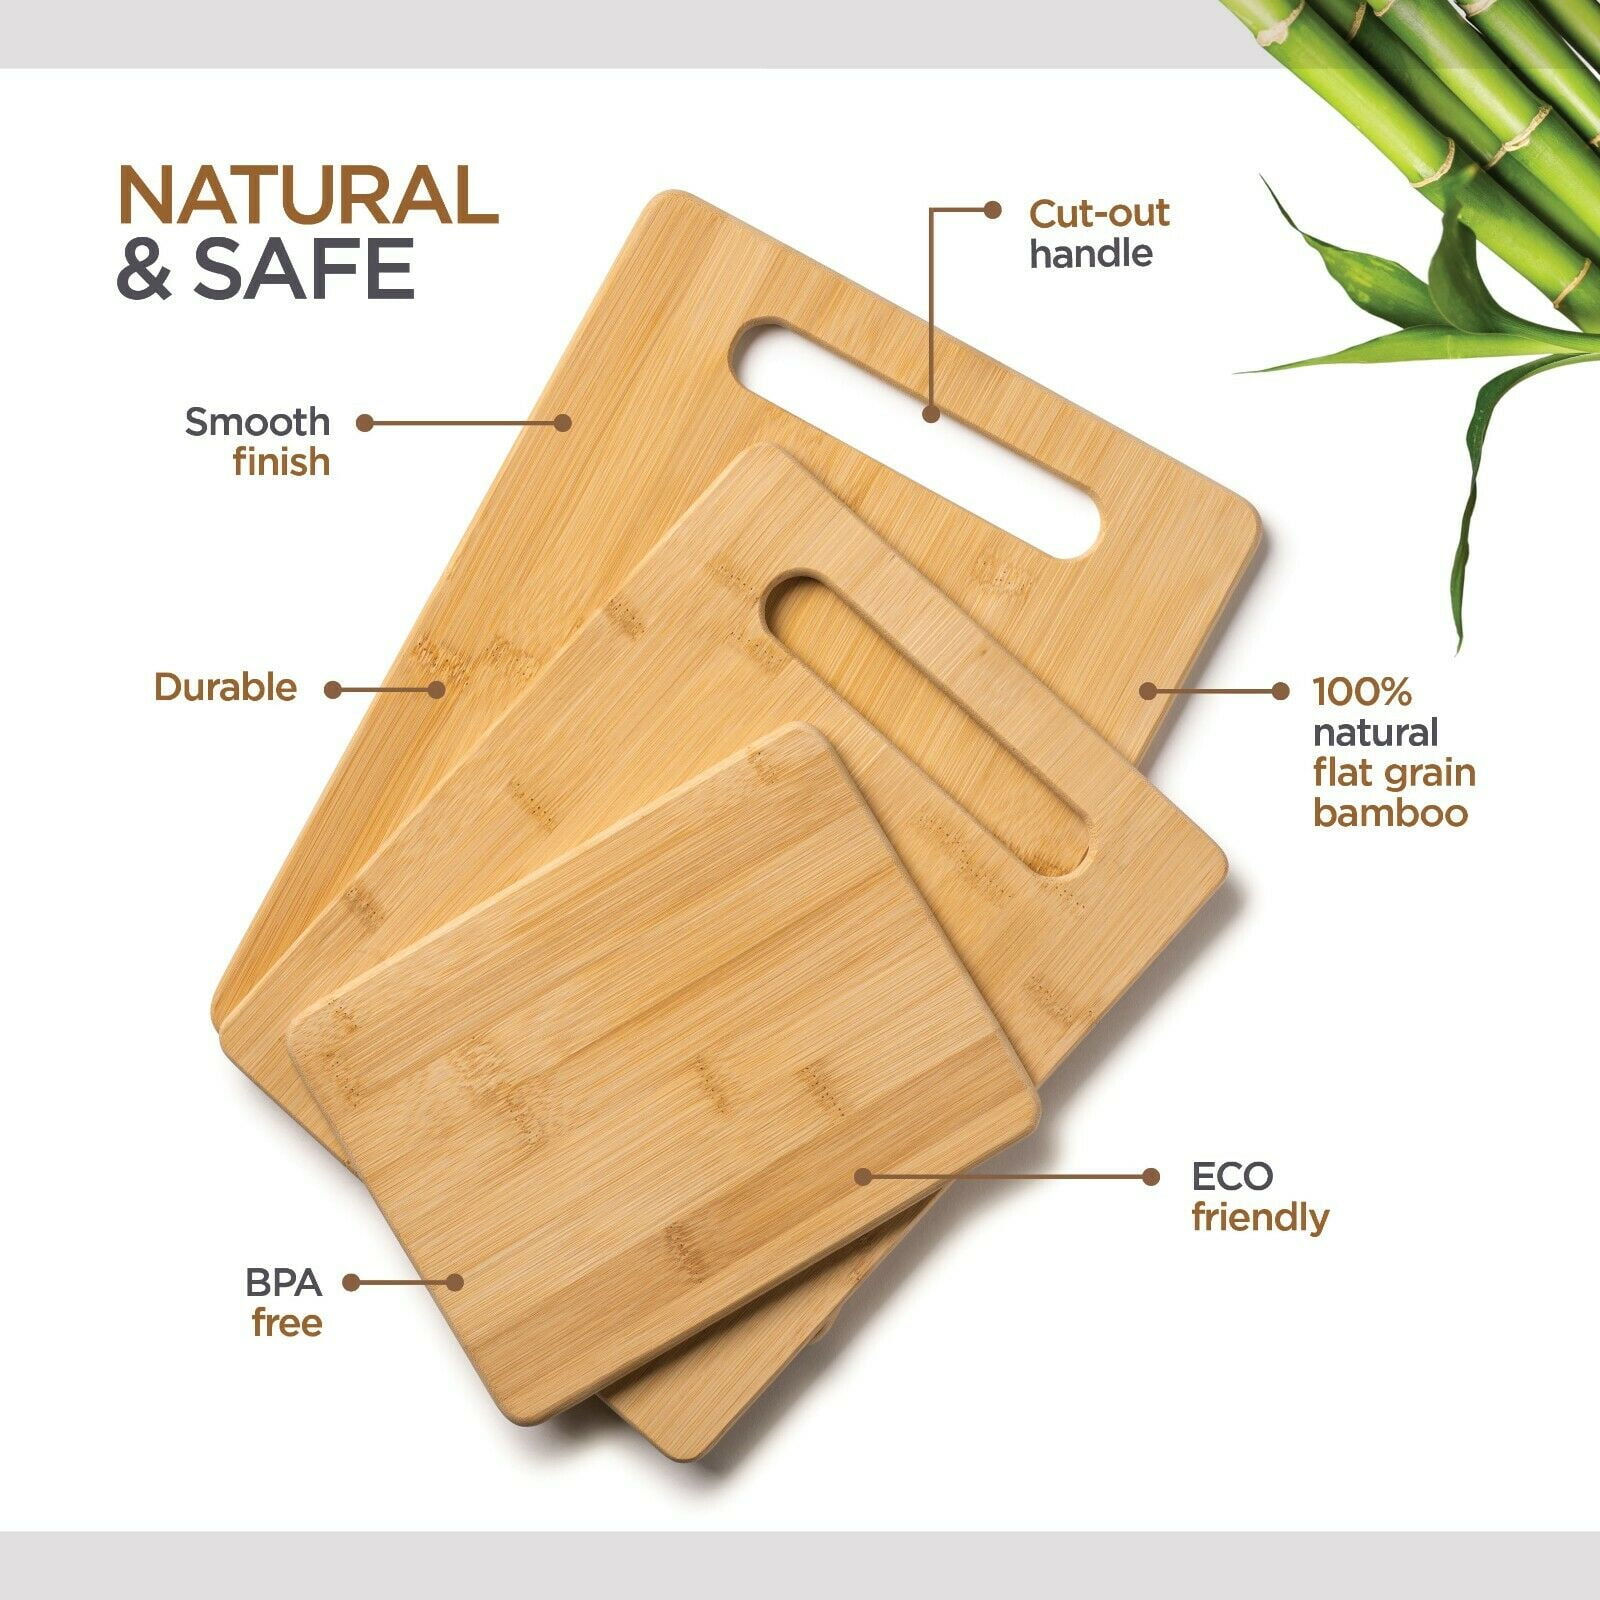 at Home Bamboo Assorted Set White Cutting Board (3 ct)